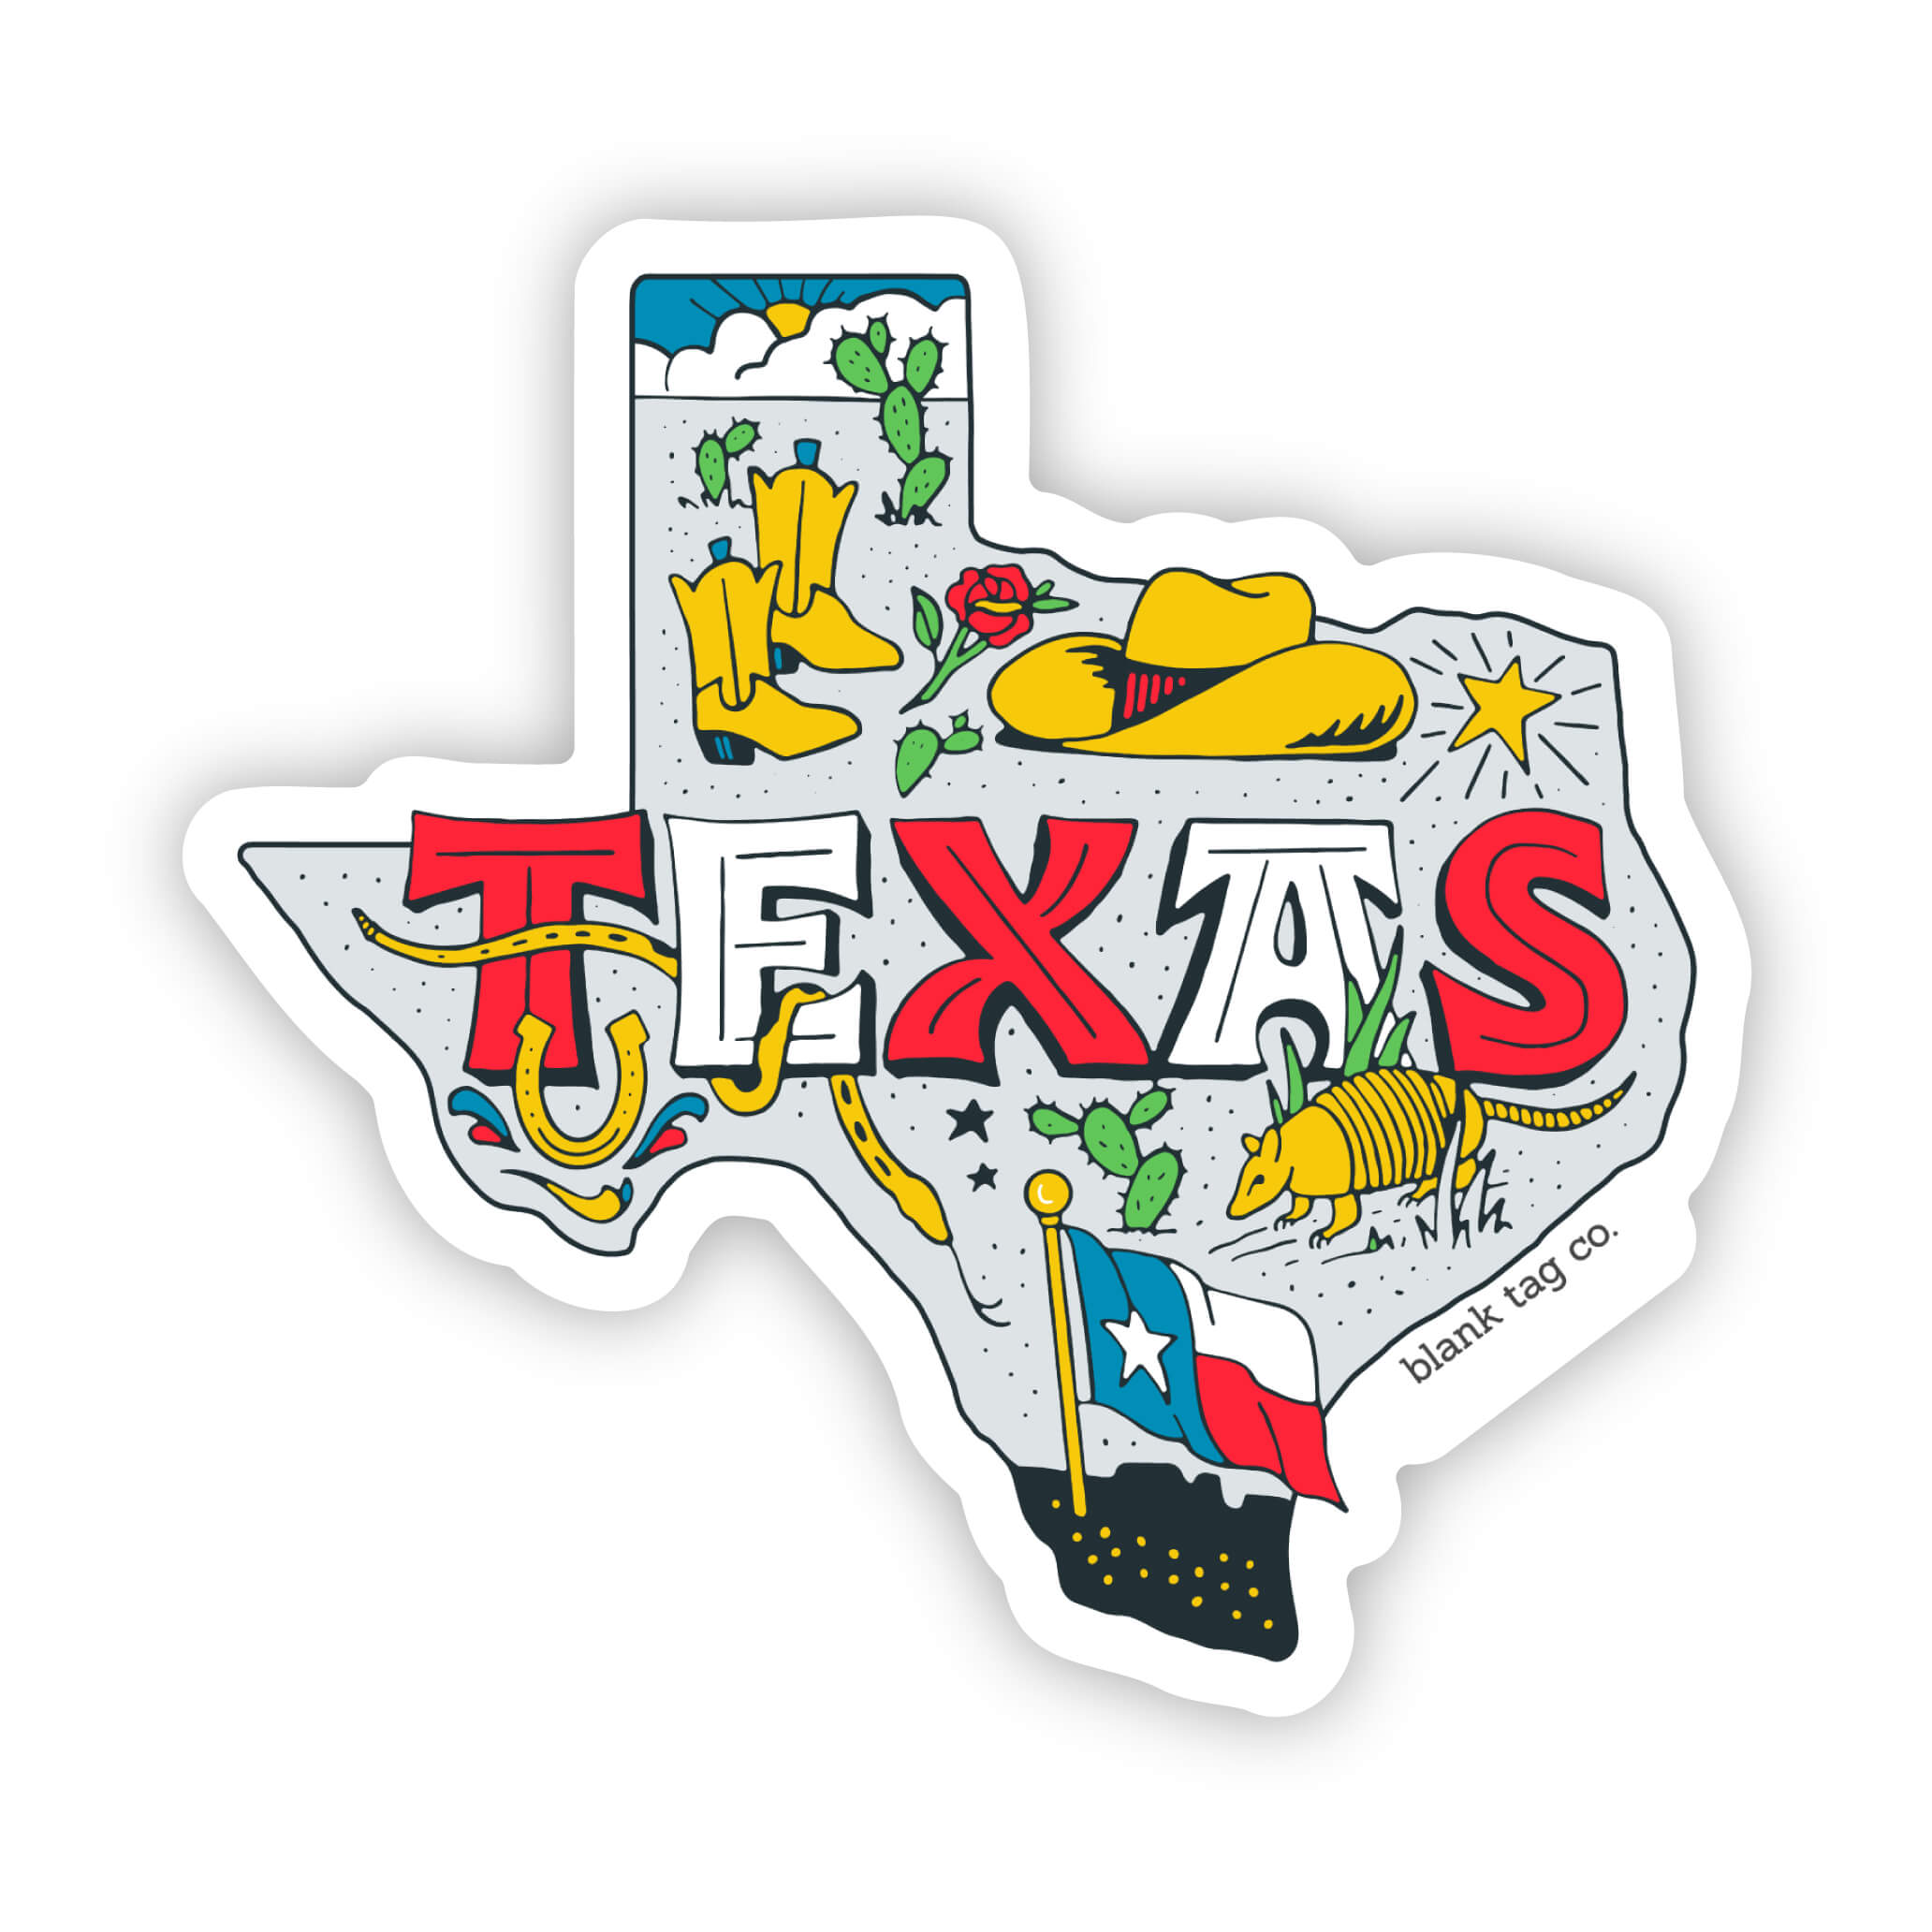 The Texas State Sticker